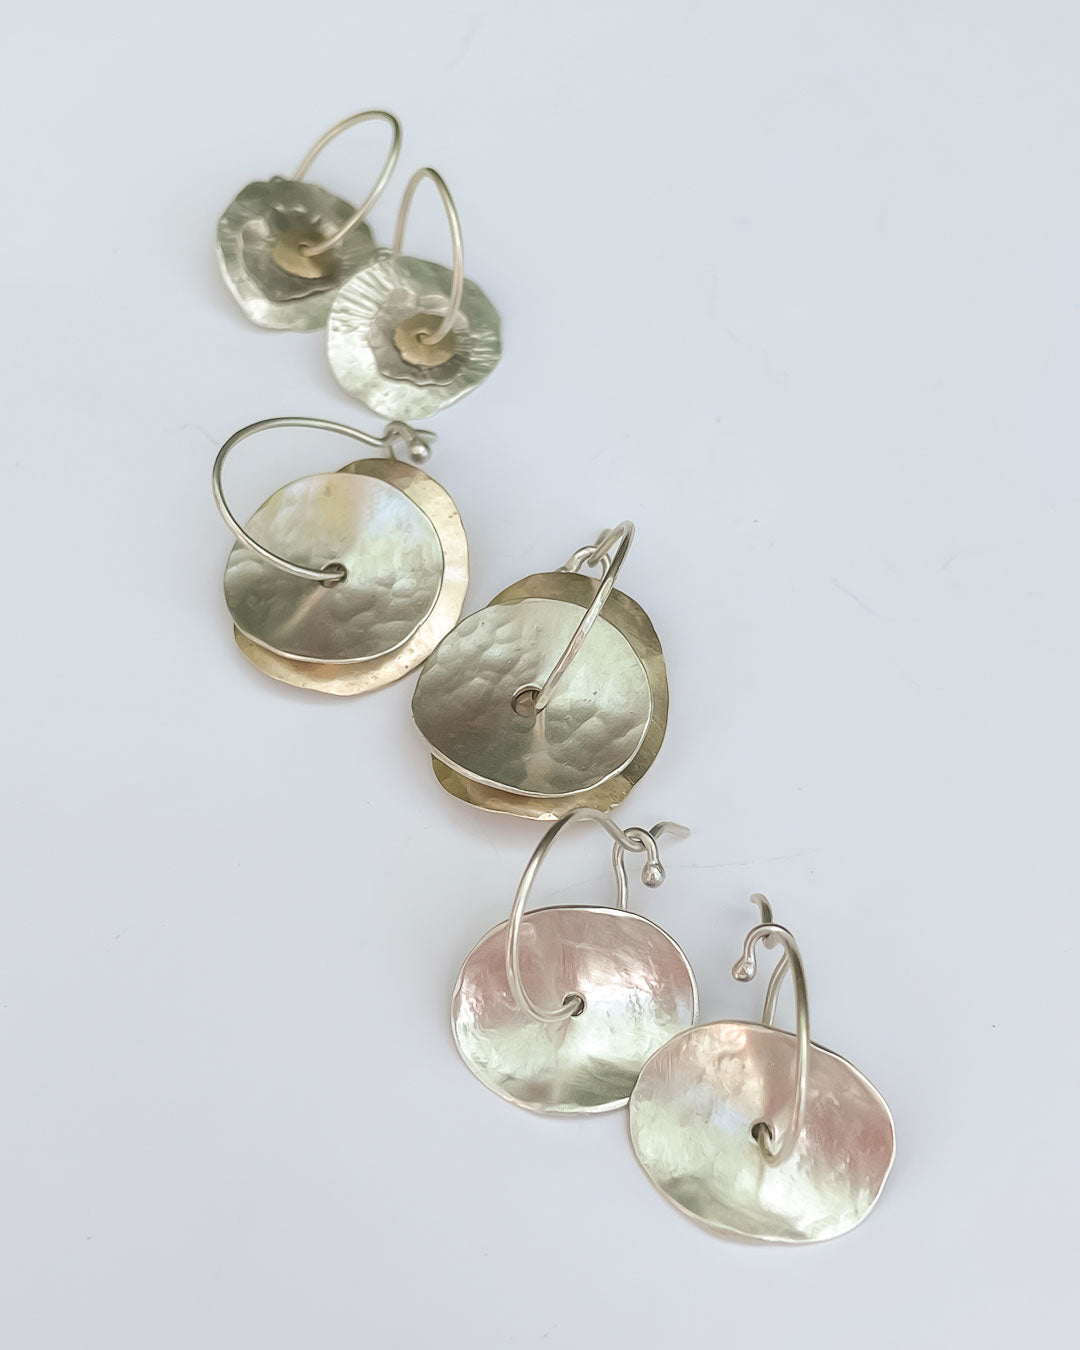 A flat Lay of other earrings from the Abstract Disc earring Range